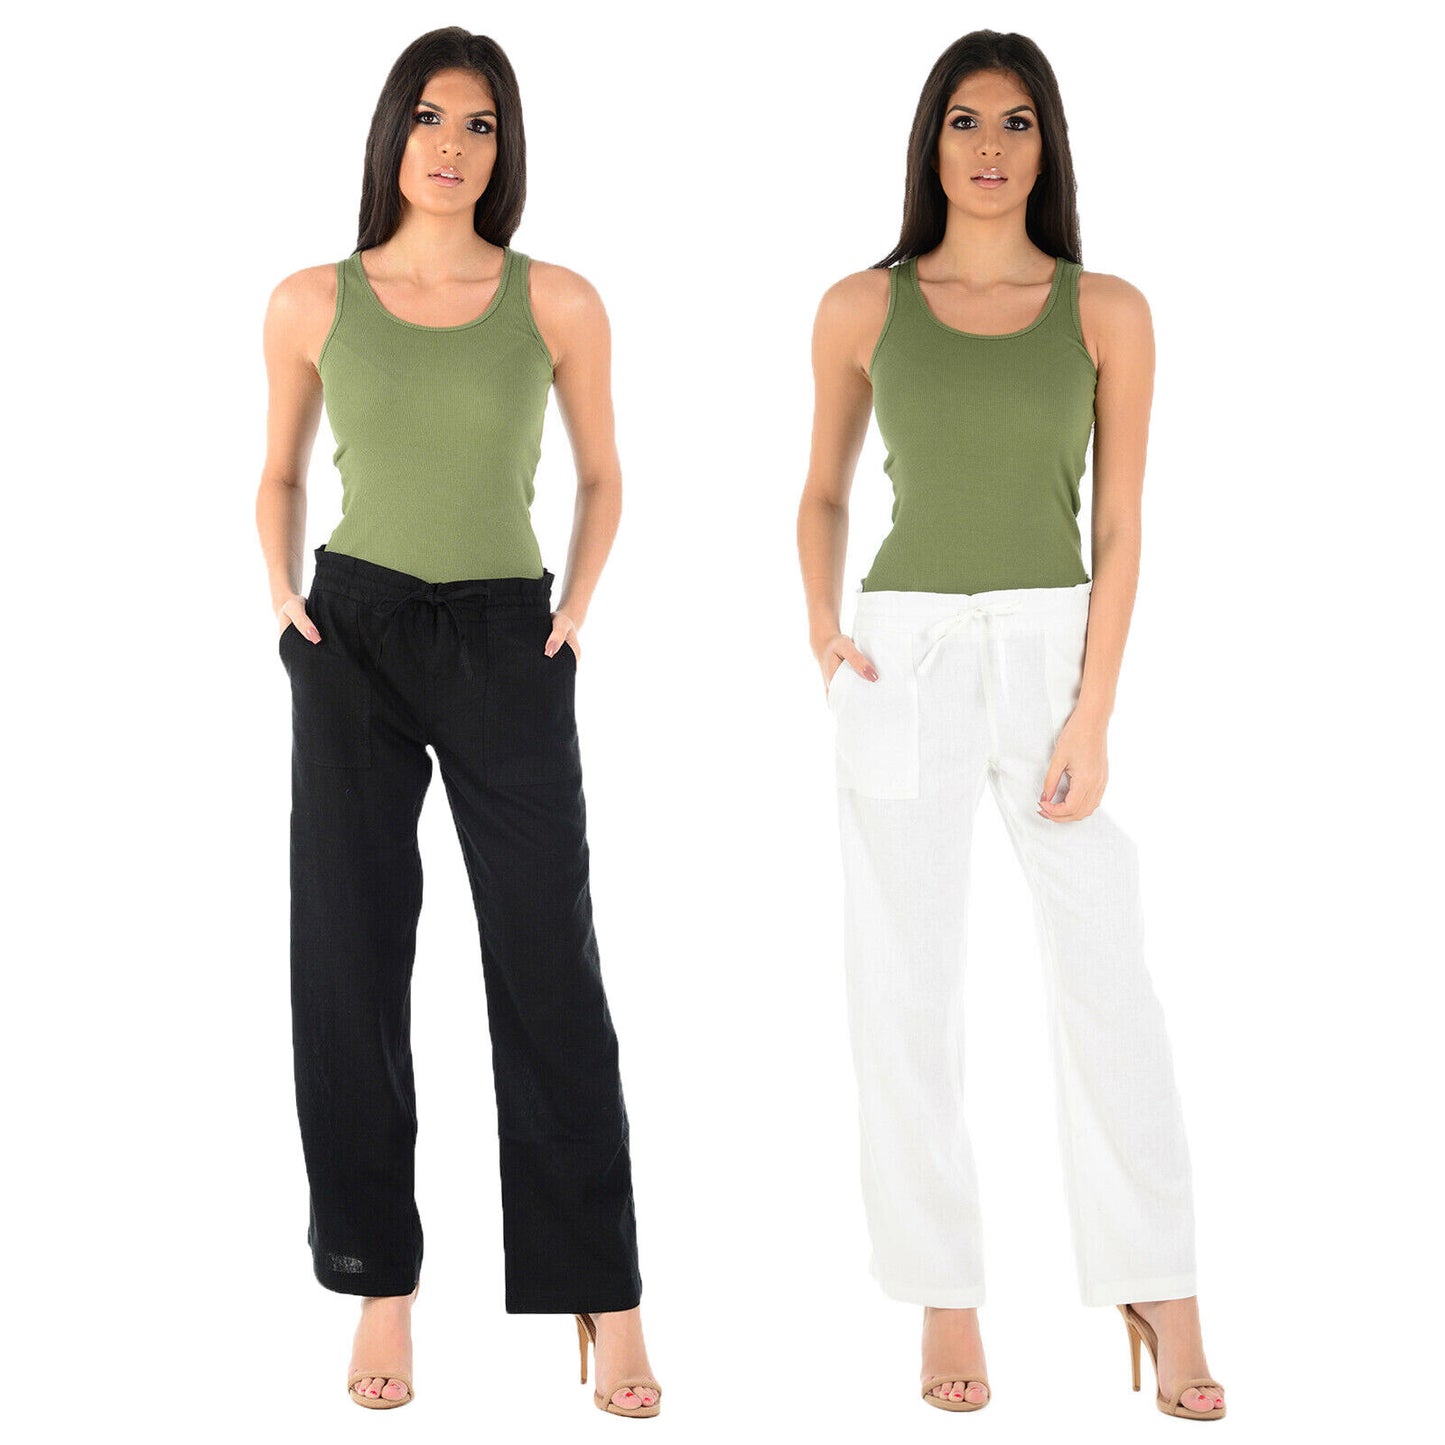 LADIES LINEN TROUSERS CASUAL HOLIDAY WOMEN SUMMER PANT ELASTICATED WAIST BOTTOMS